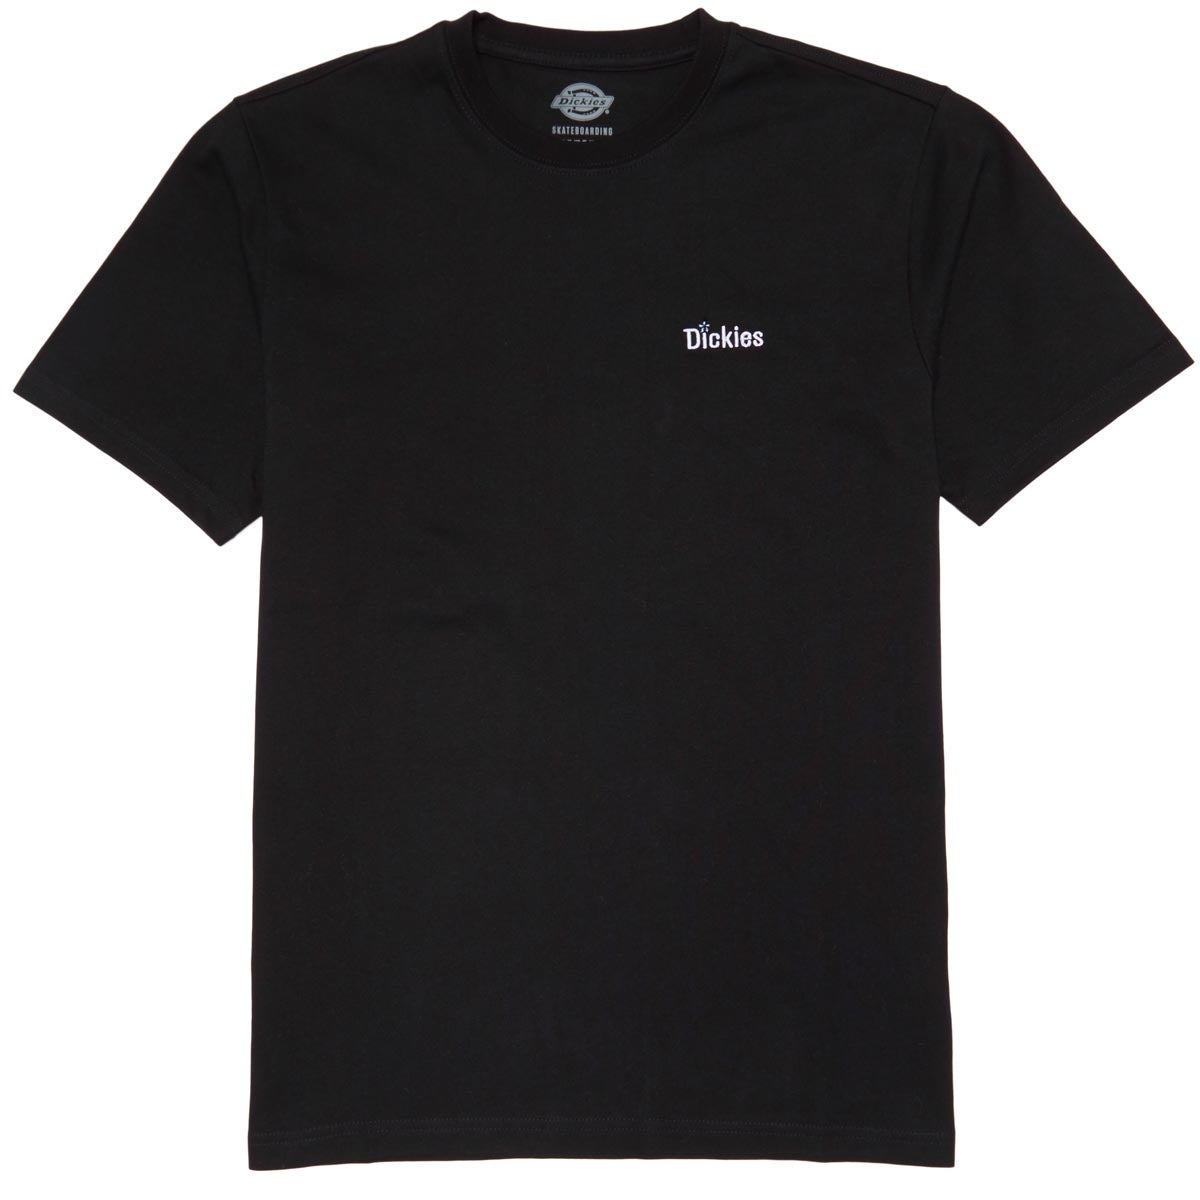 Dickies Tom Knox Chest Graphic T-Shirt - Knit Black image 1